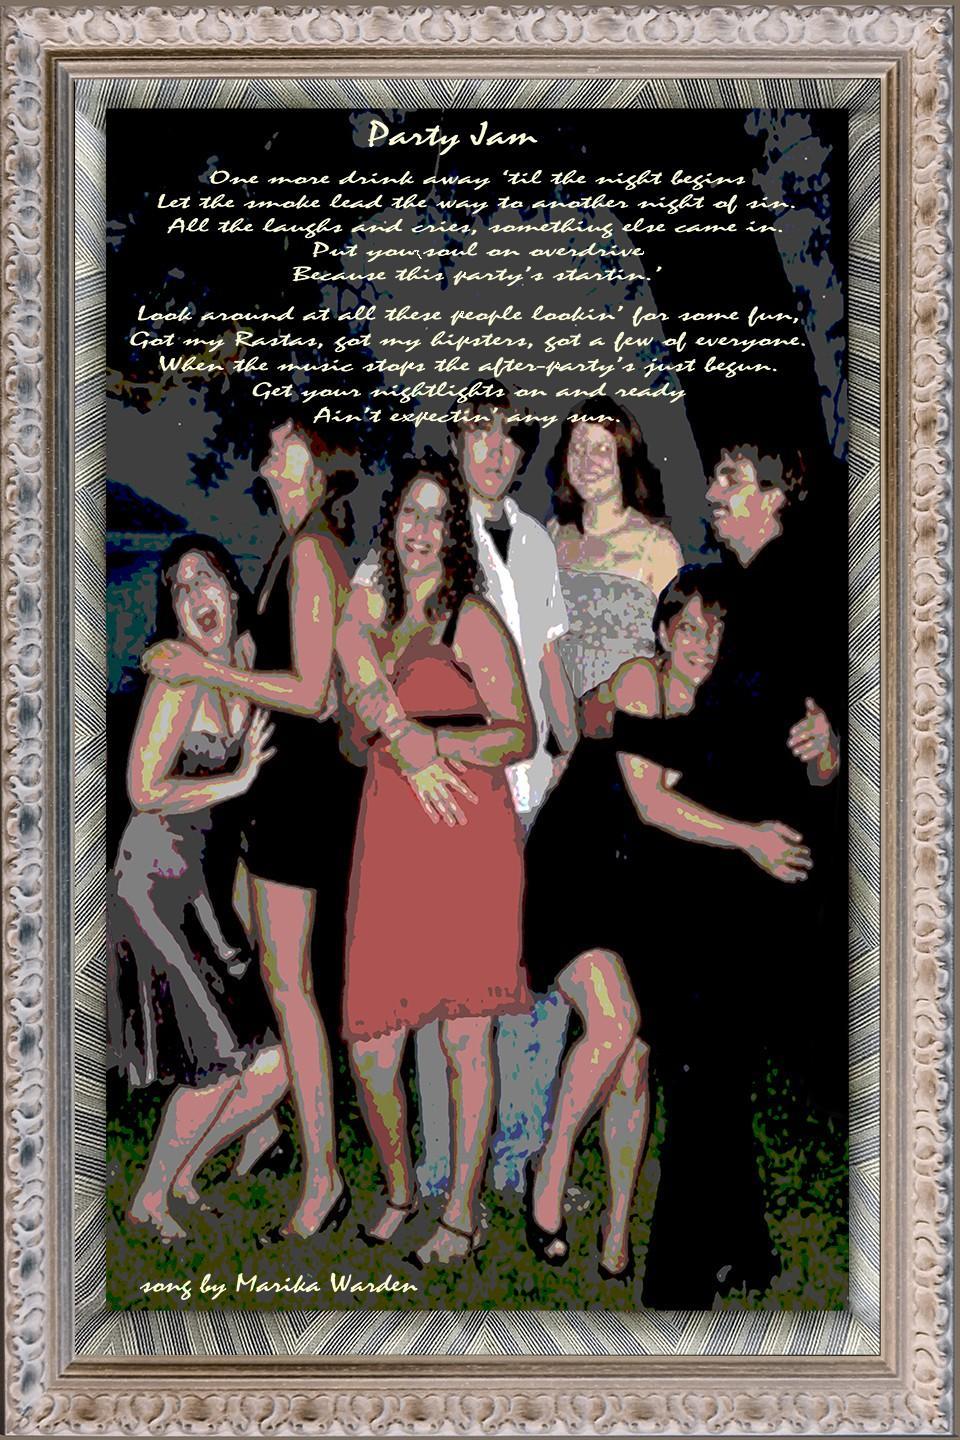 Robin Botie of ithaca, New York, photoshops a party scene to illustrate her daughter's first apartment, and adds her daughter's poem about partying.